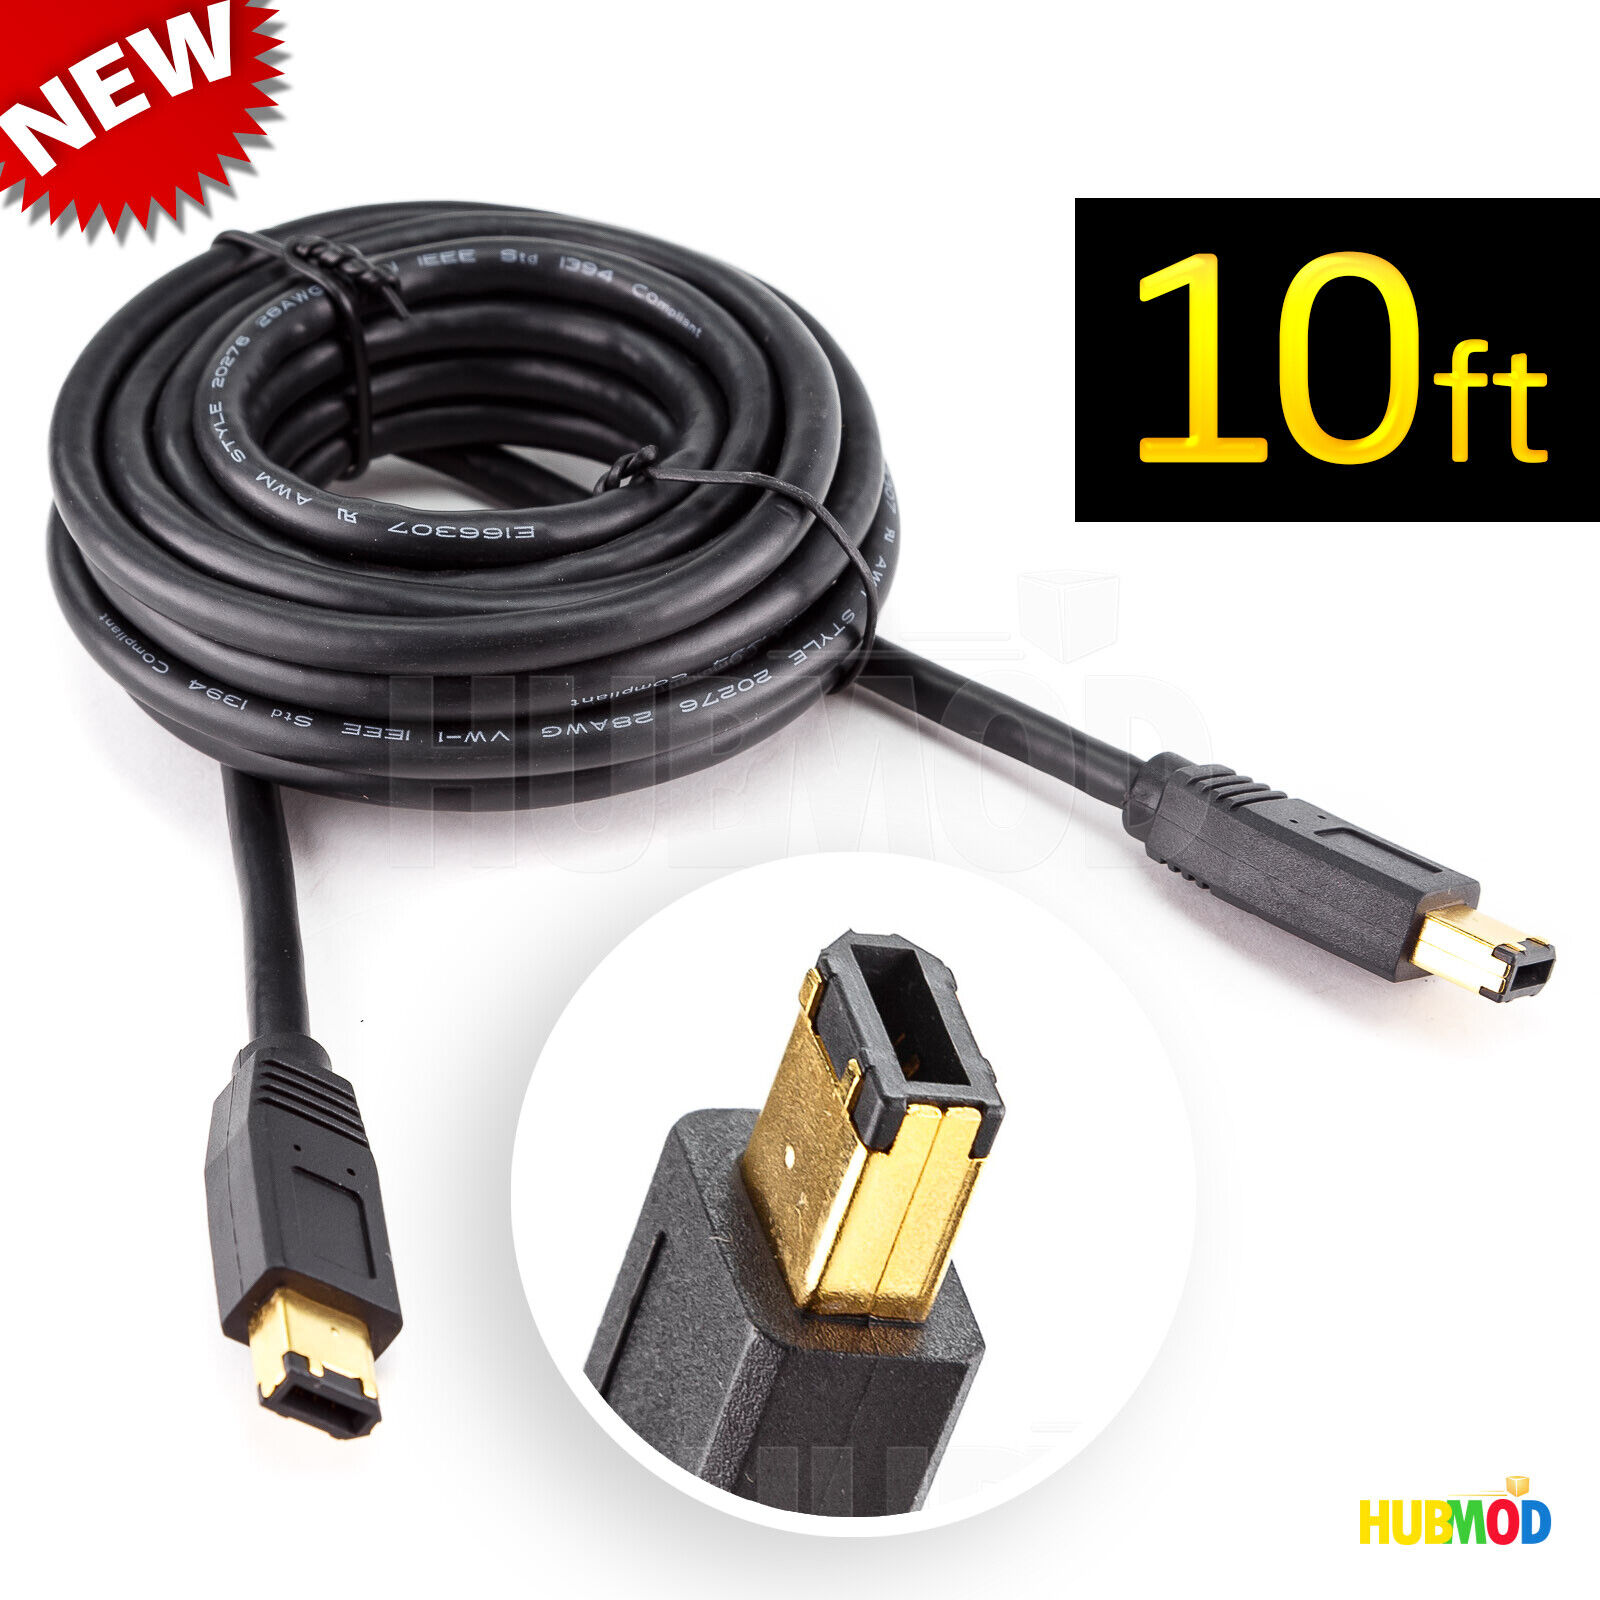 NEW GE 10 ft. 6 Pin FireWire Cable IEEE 1394 High Speed PC MAC - 24K Gold Plated